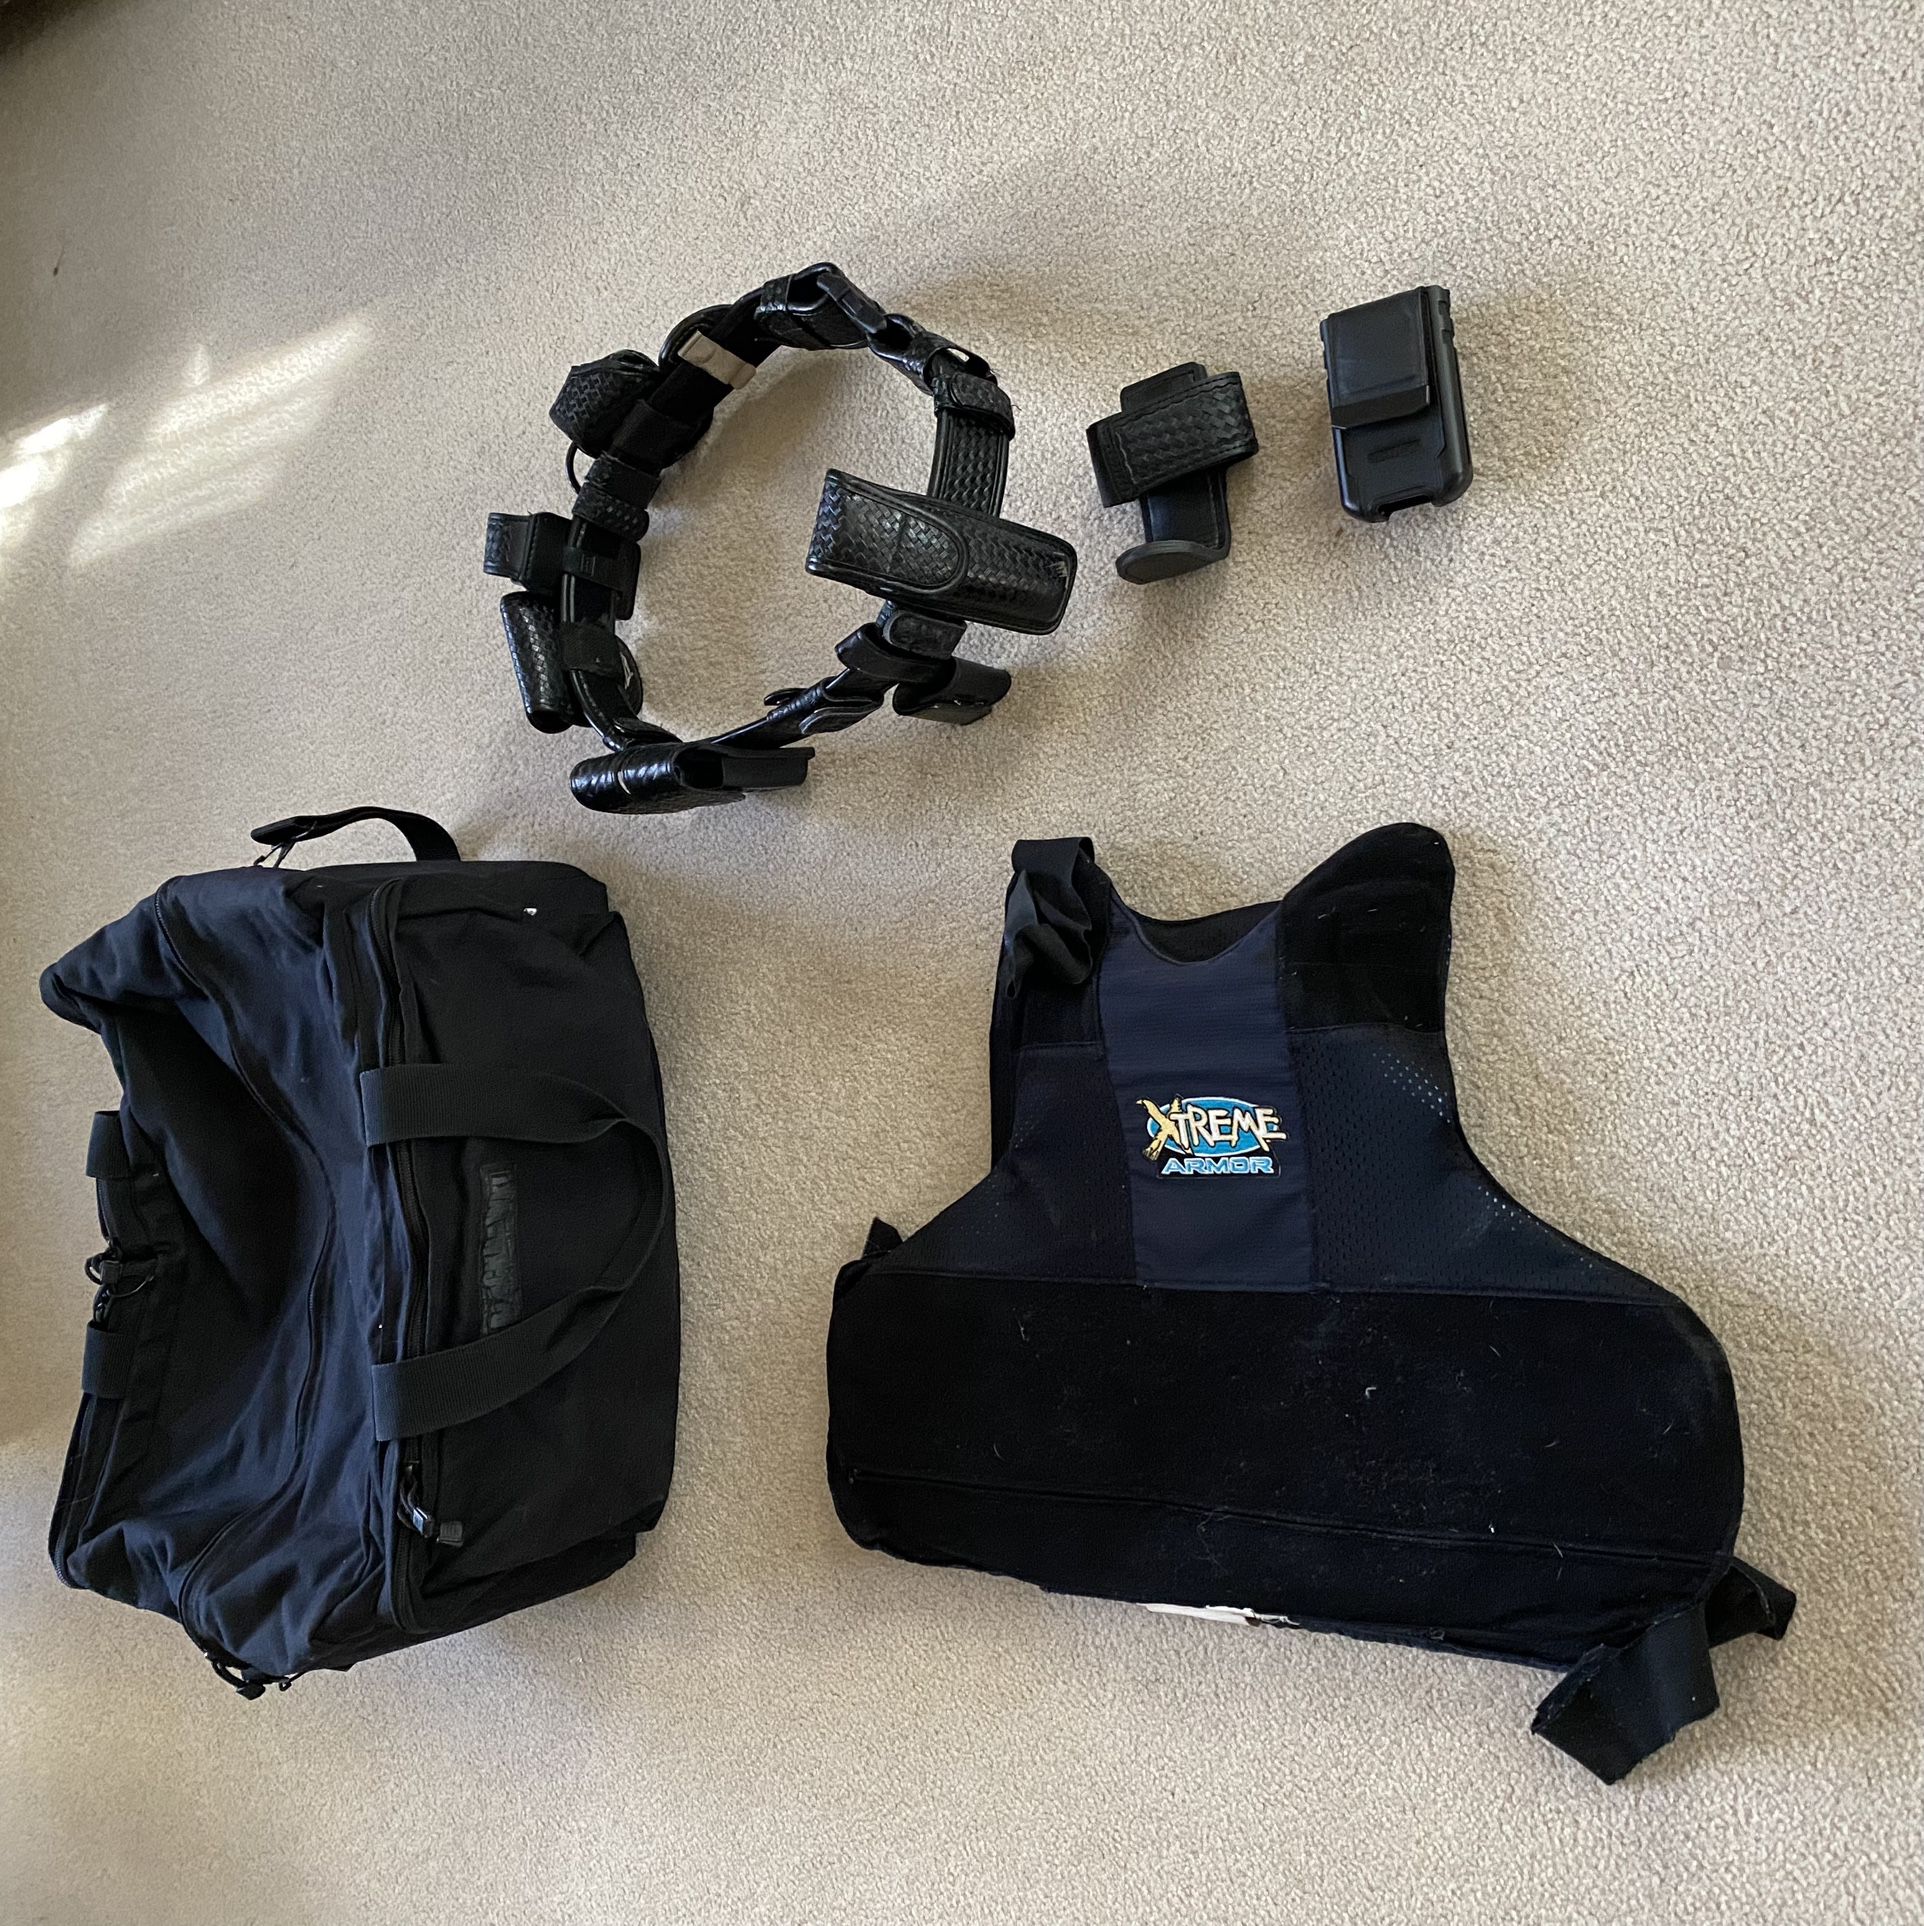 ABA Xtreme Armor Ballistic vest in size XXLL, Bianchi leather duty belt XL size 34-36 with handcuff case, baton case, Double magazine case and more, p